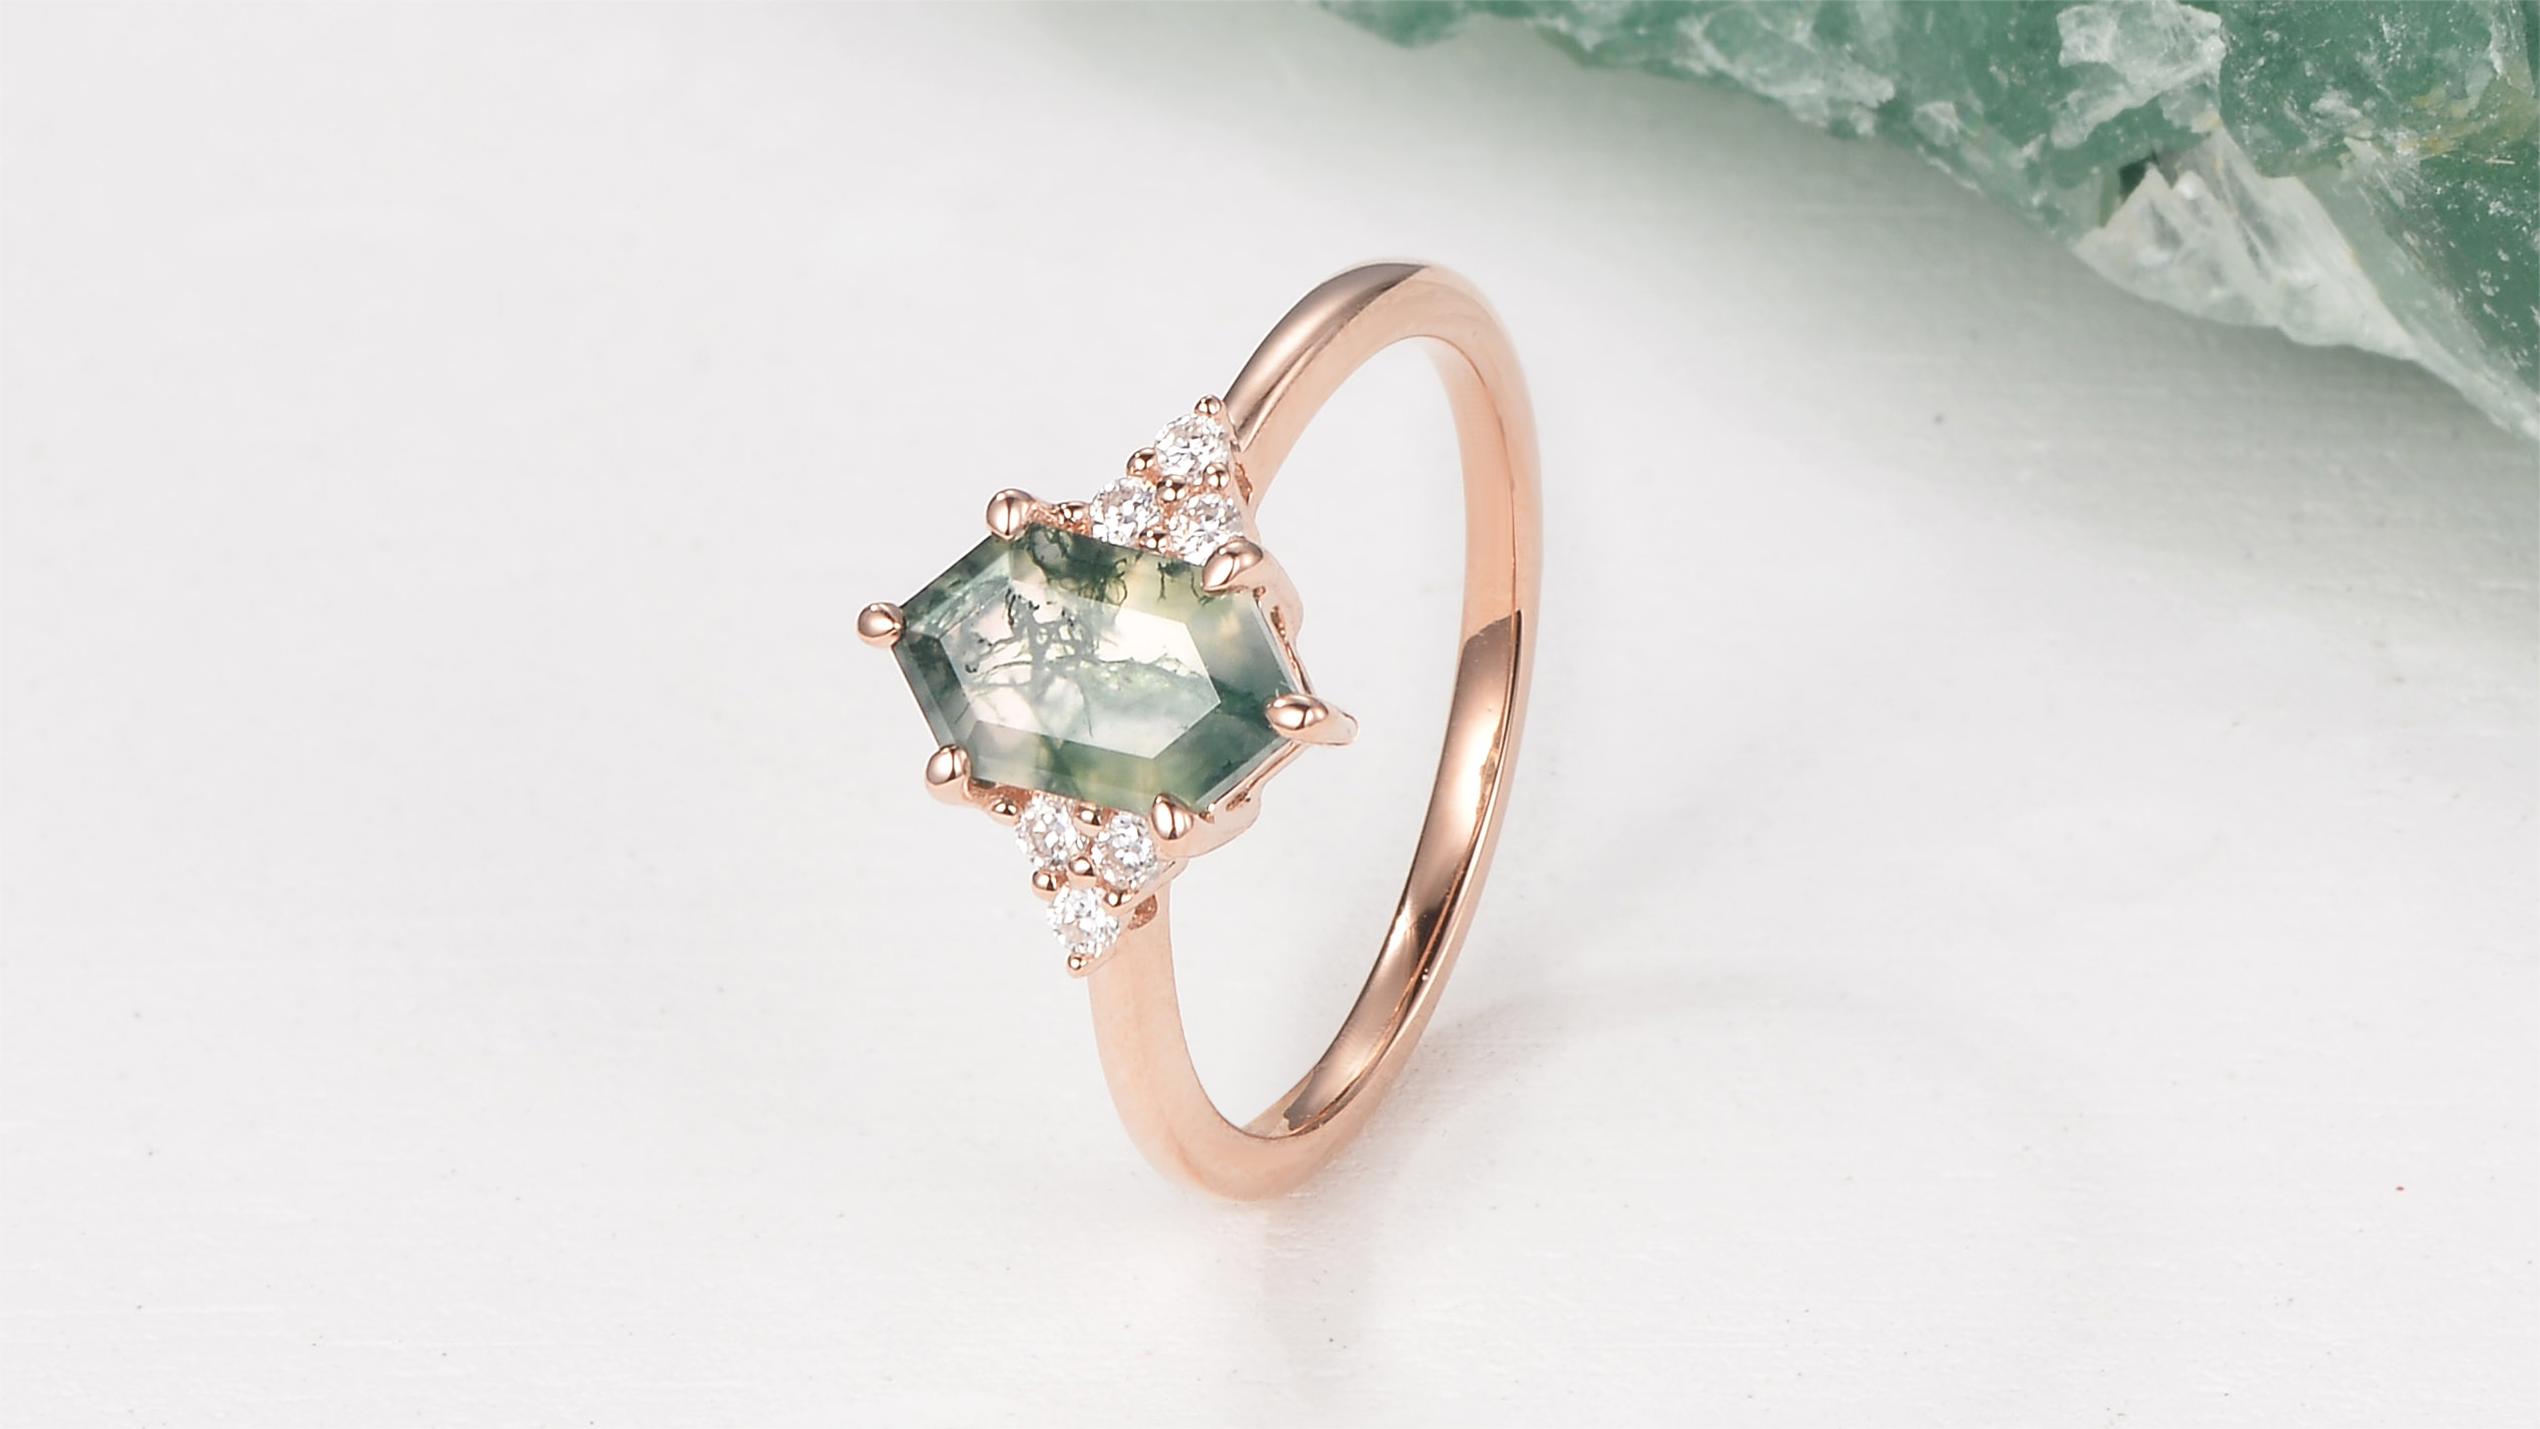 Why Are Moss Agate Engagement Rings Perfect for Commemorating New Beginnings?